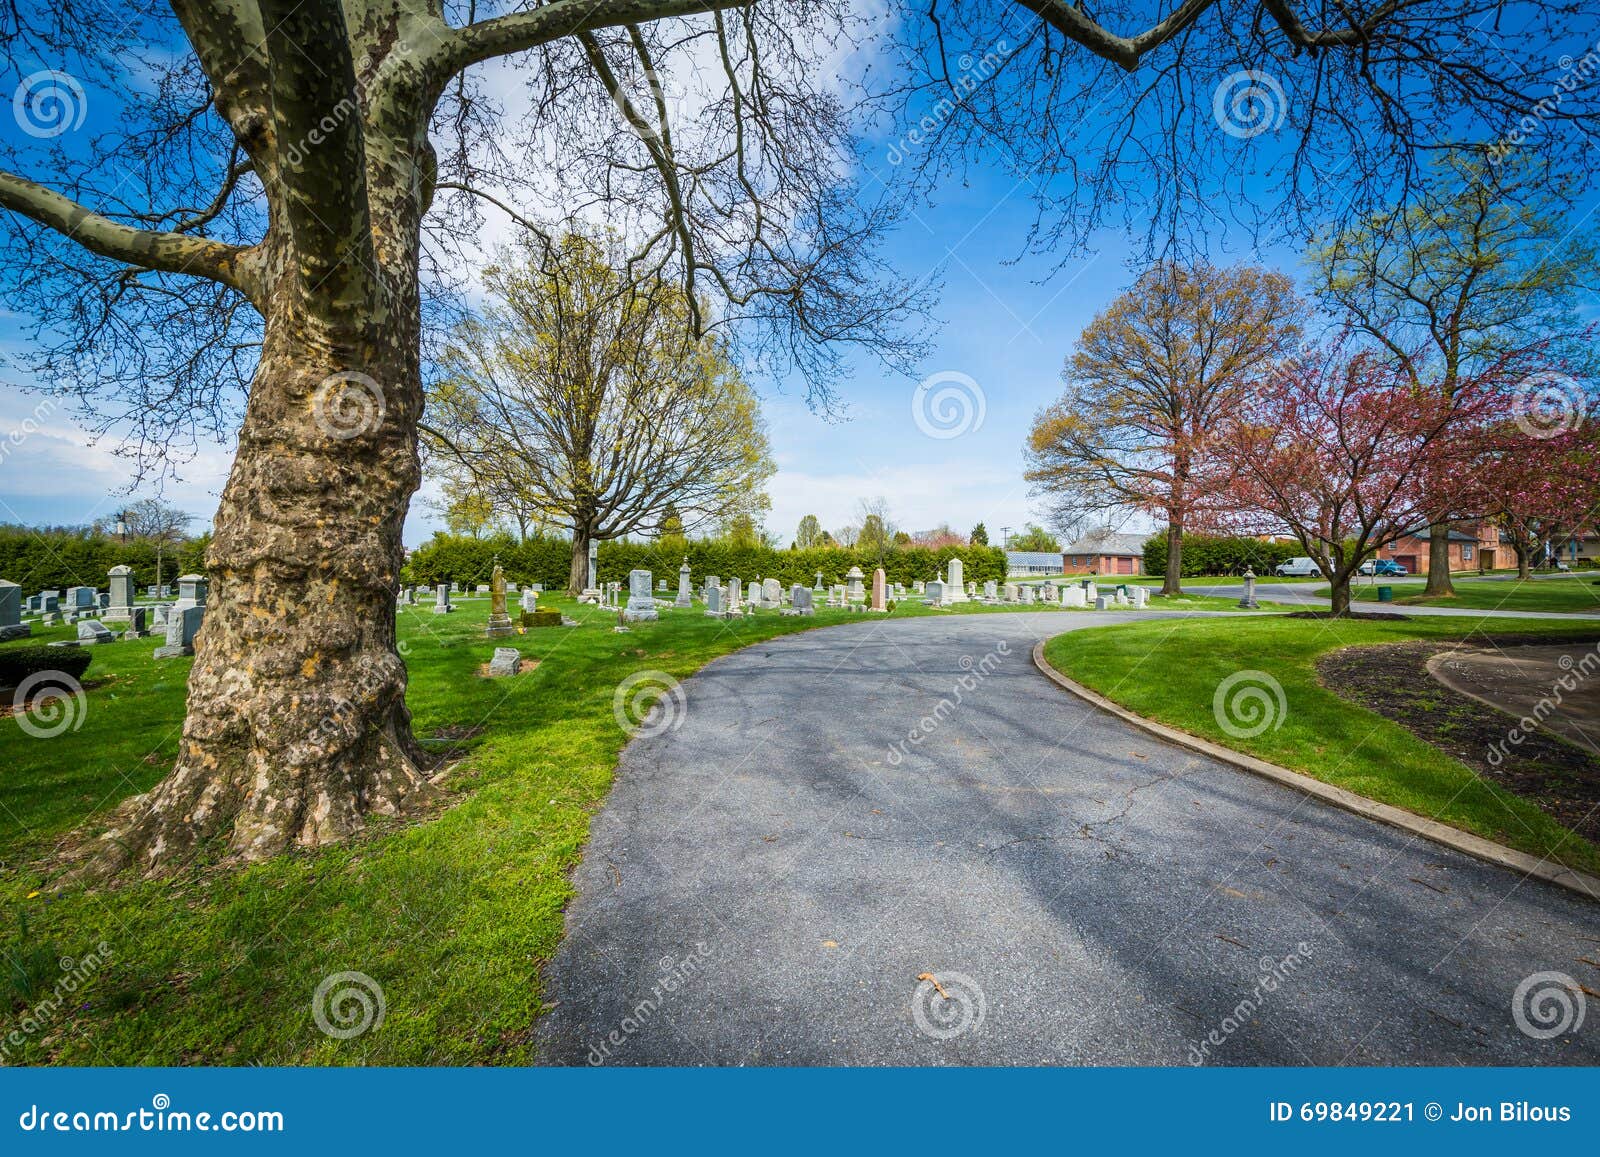 road at mount olivet cemetery in frederick, maryland.